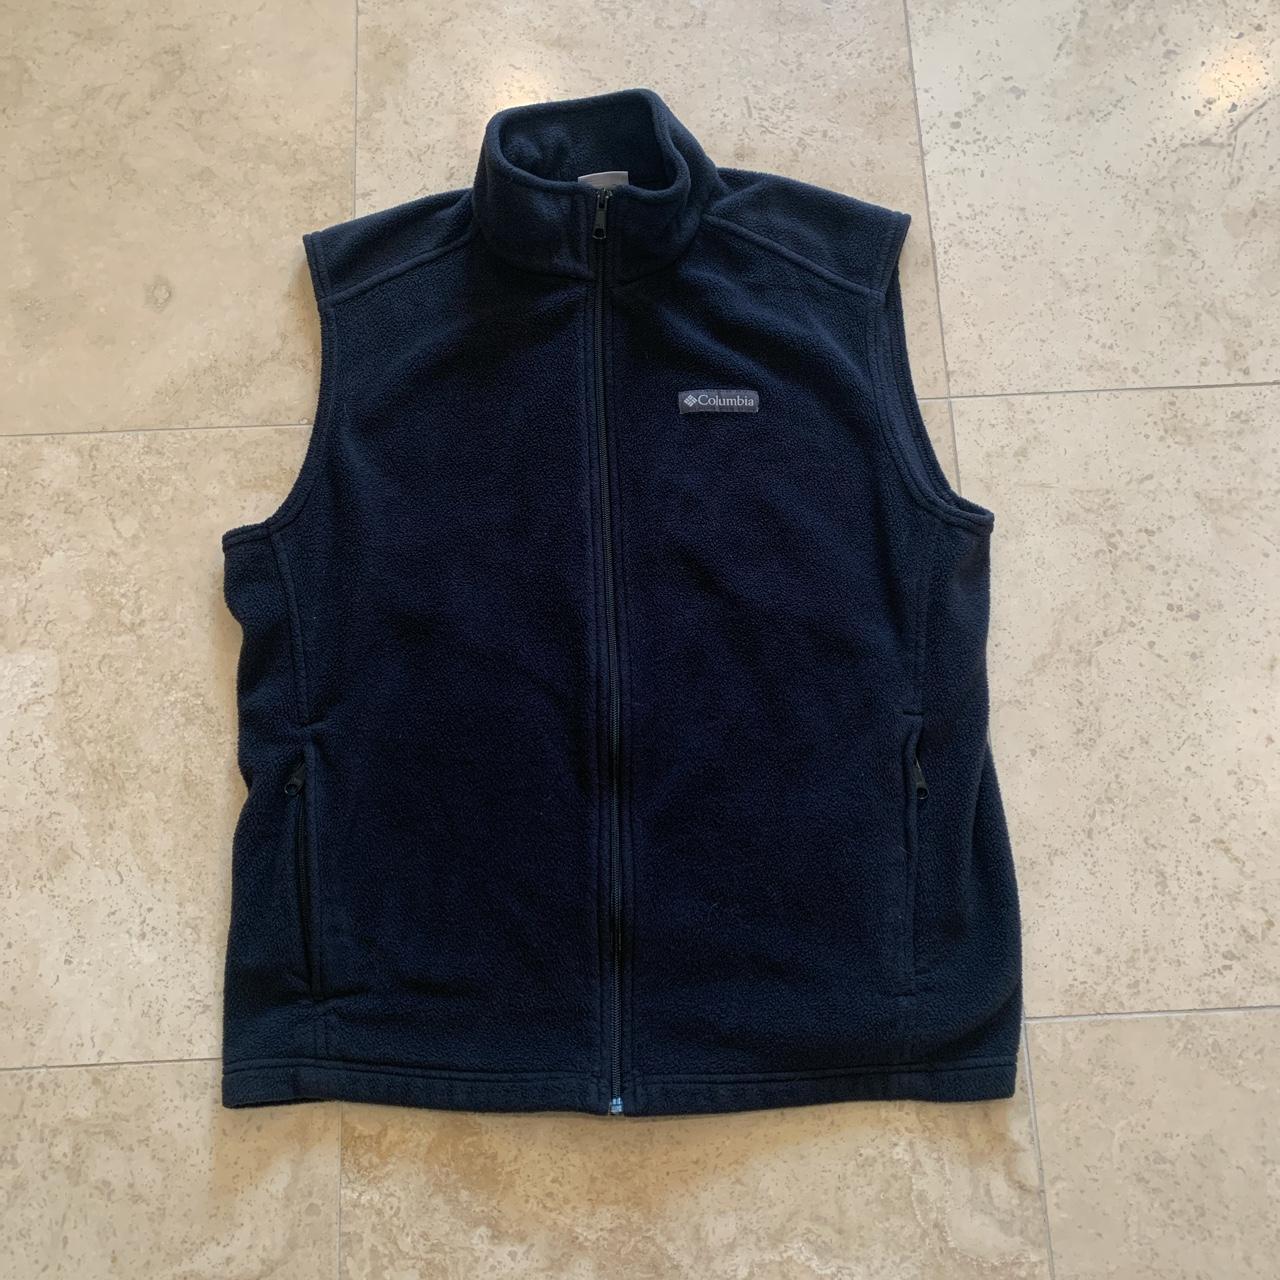 Vintage Columbia Vest, in great condition, open to... - Depop